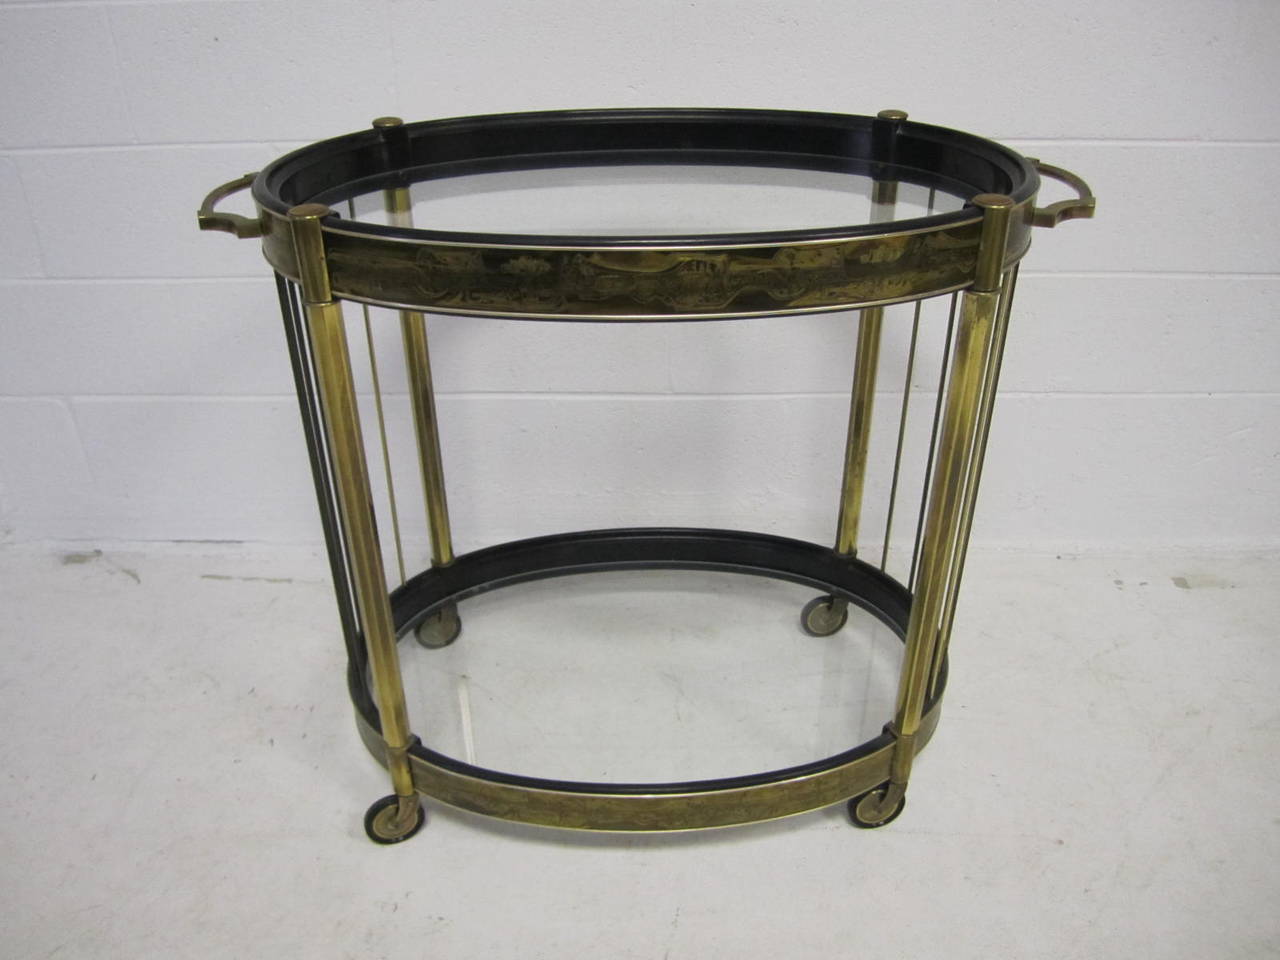 Brass oval bar cart by Bernhard Rohne for Mastercraft.  Black lacquered and acid etched brass wrapped oval bar cart by Mastercraft. Patinated brass legs and polished brass rods support the glass bottomed serving areas, which are wrapped in Bernhard